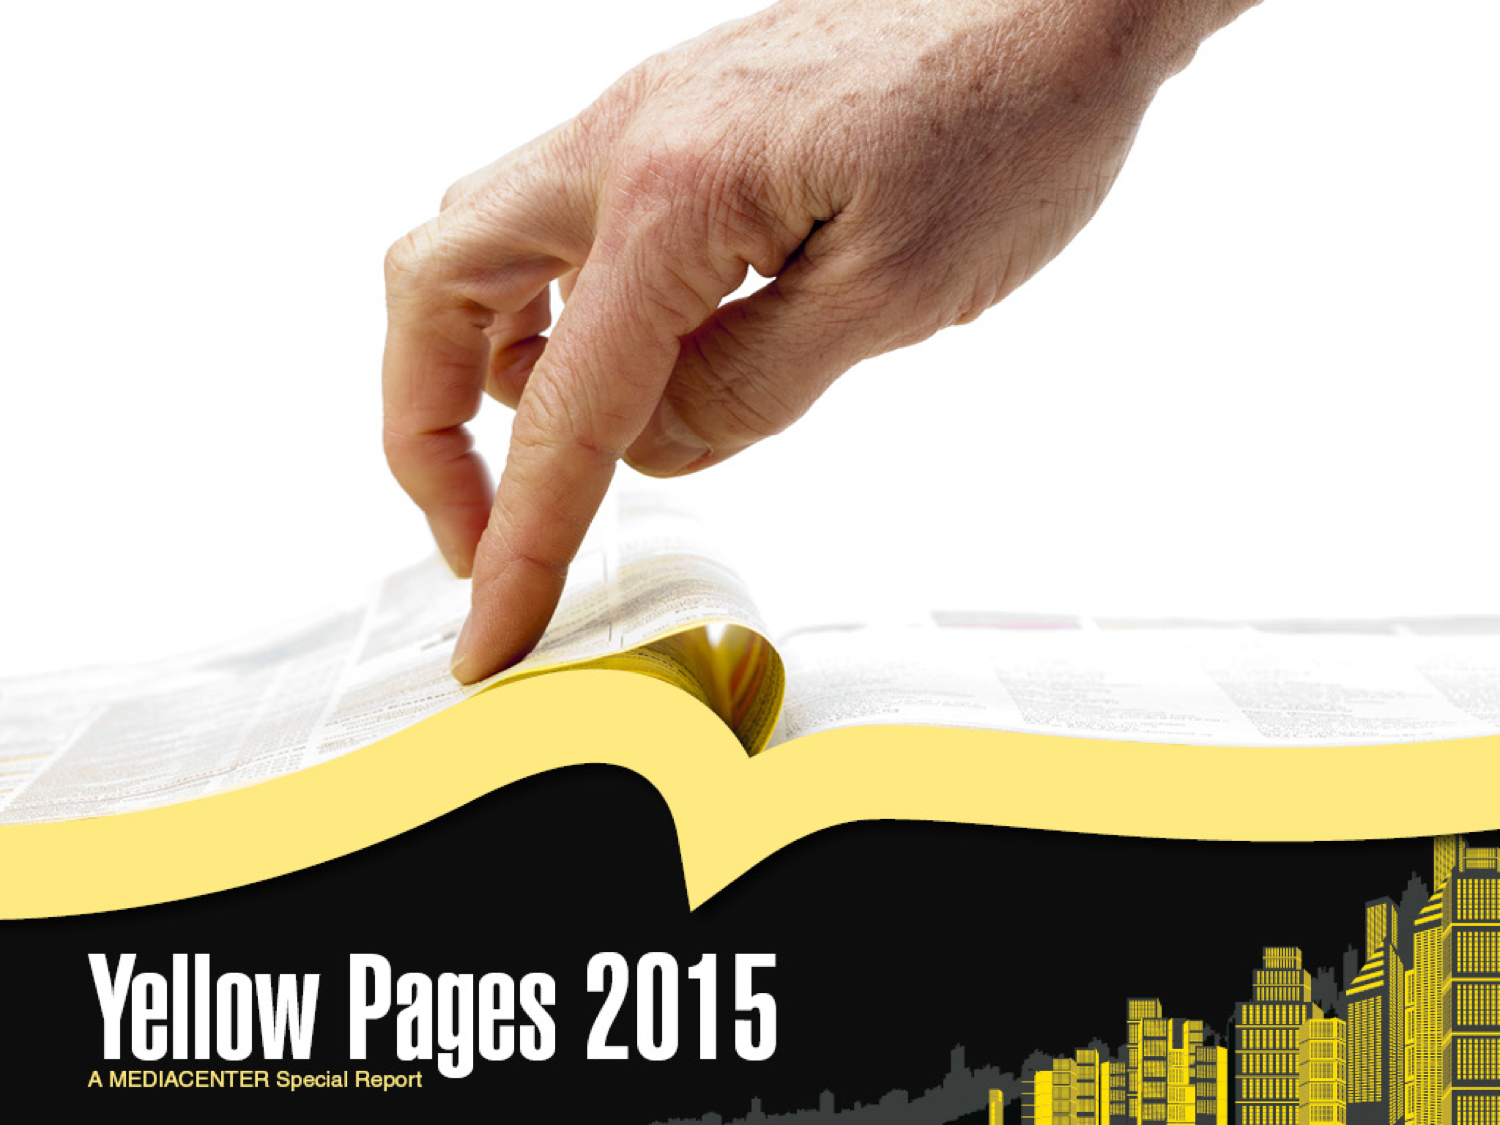 YELLOW PAGES 2015